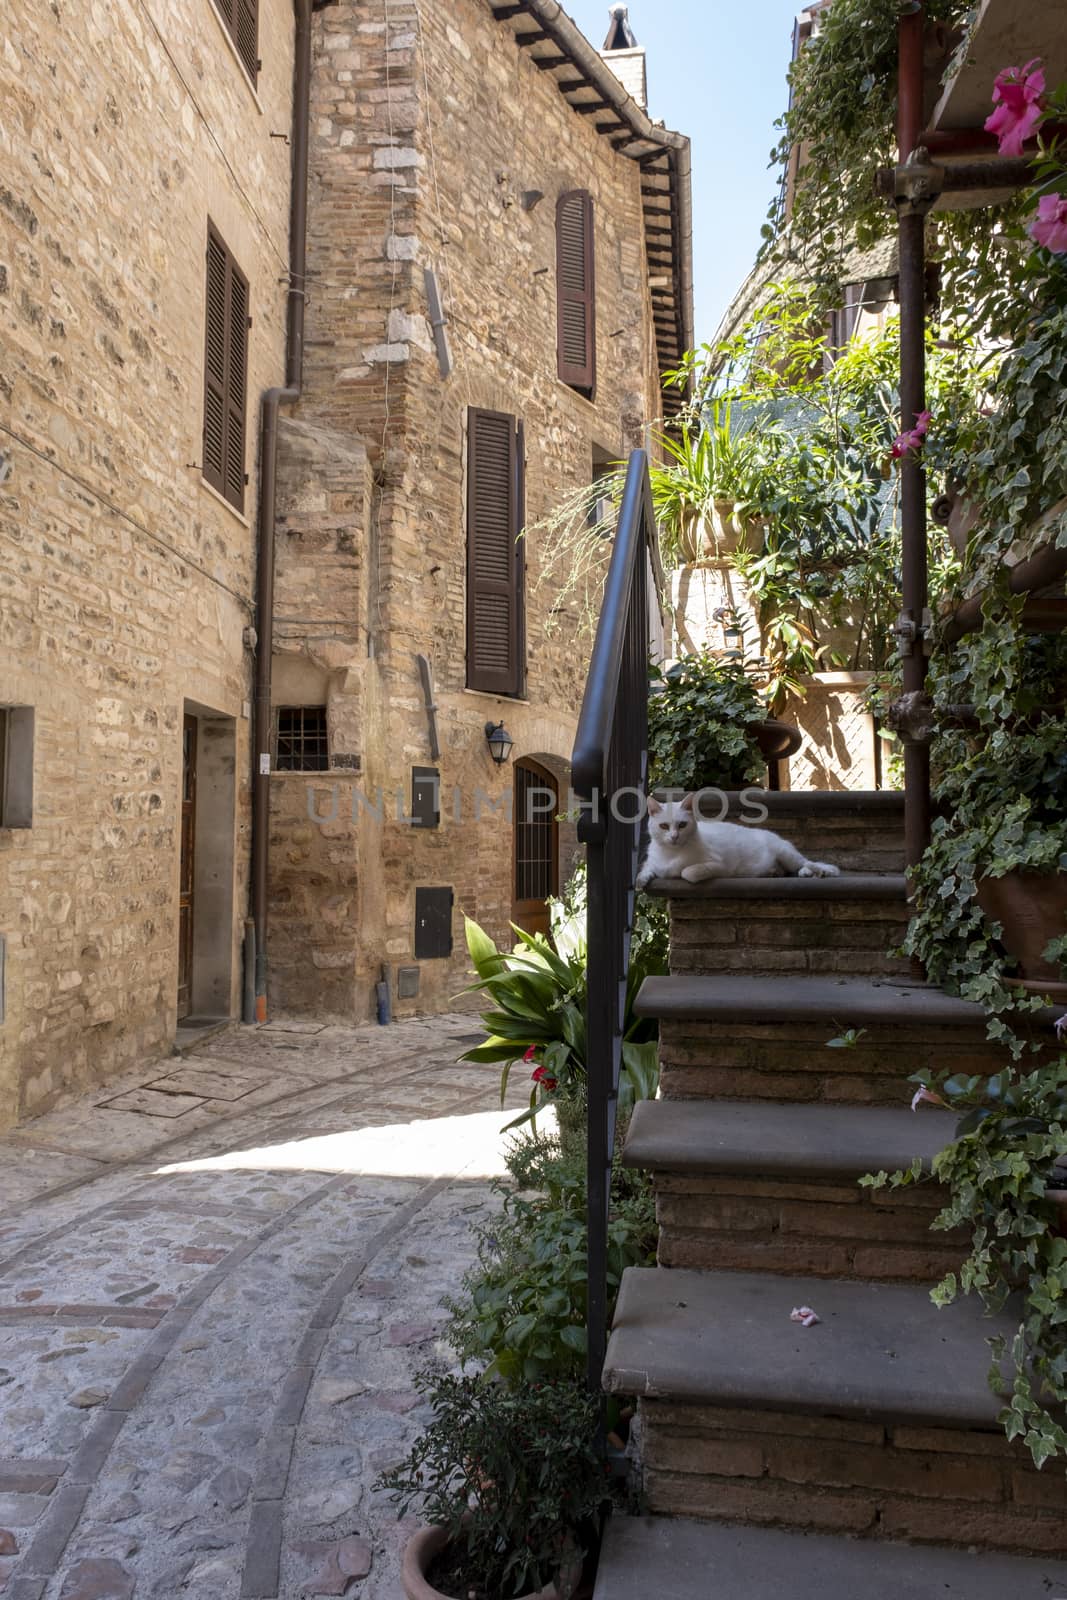 A white cat in an alley in a typical medieval Italian village during a summer day by Tjeerdkruse